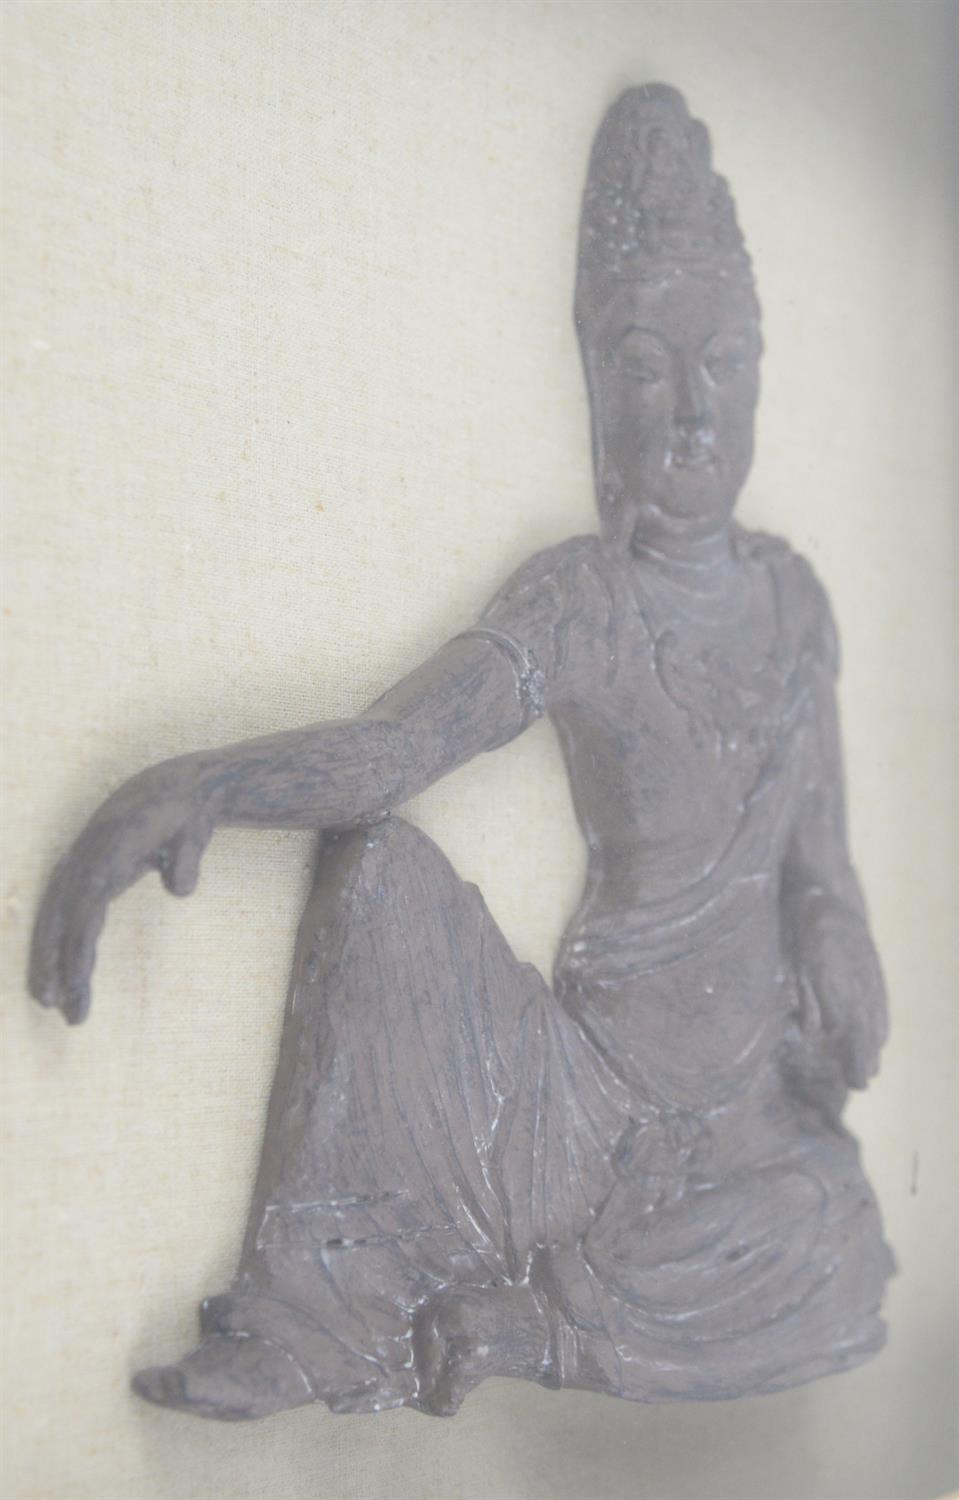 Thai seated figure wall mount, later framed, believed to be bronze, frame 41.5 cm square, - Image 3 of 6